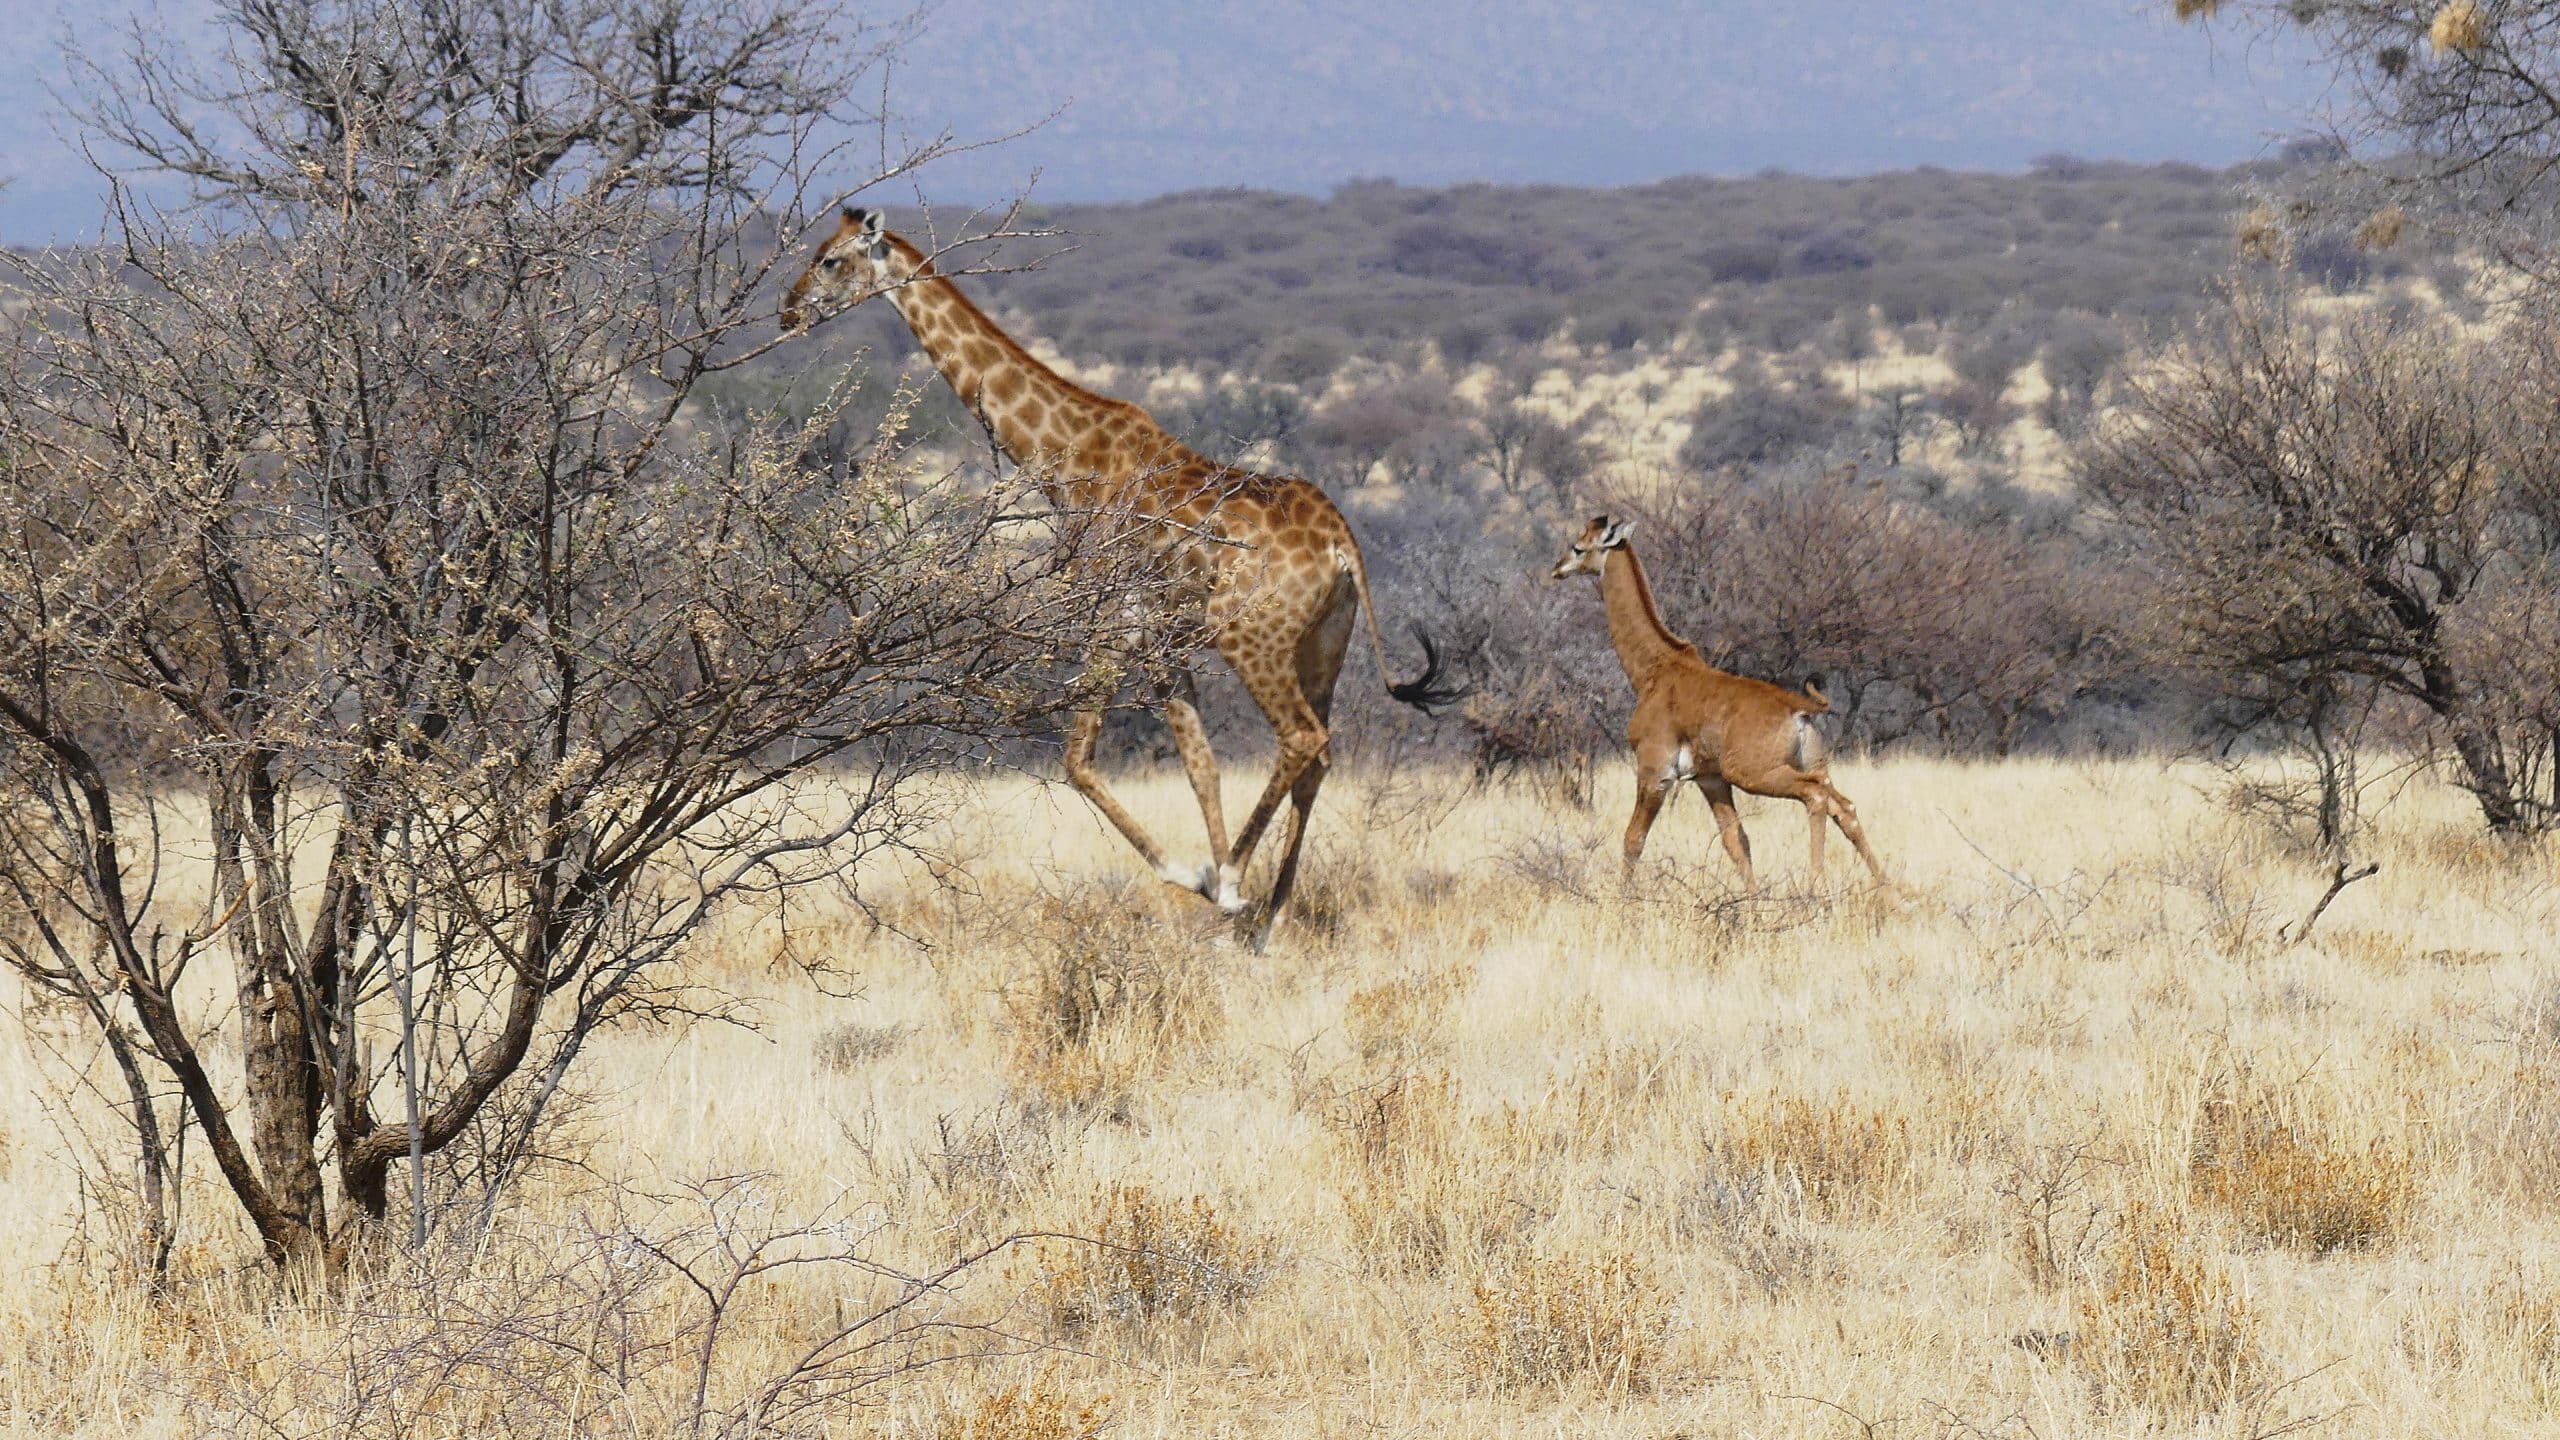 Seeing double – spotless giraffe in Namibia